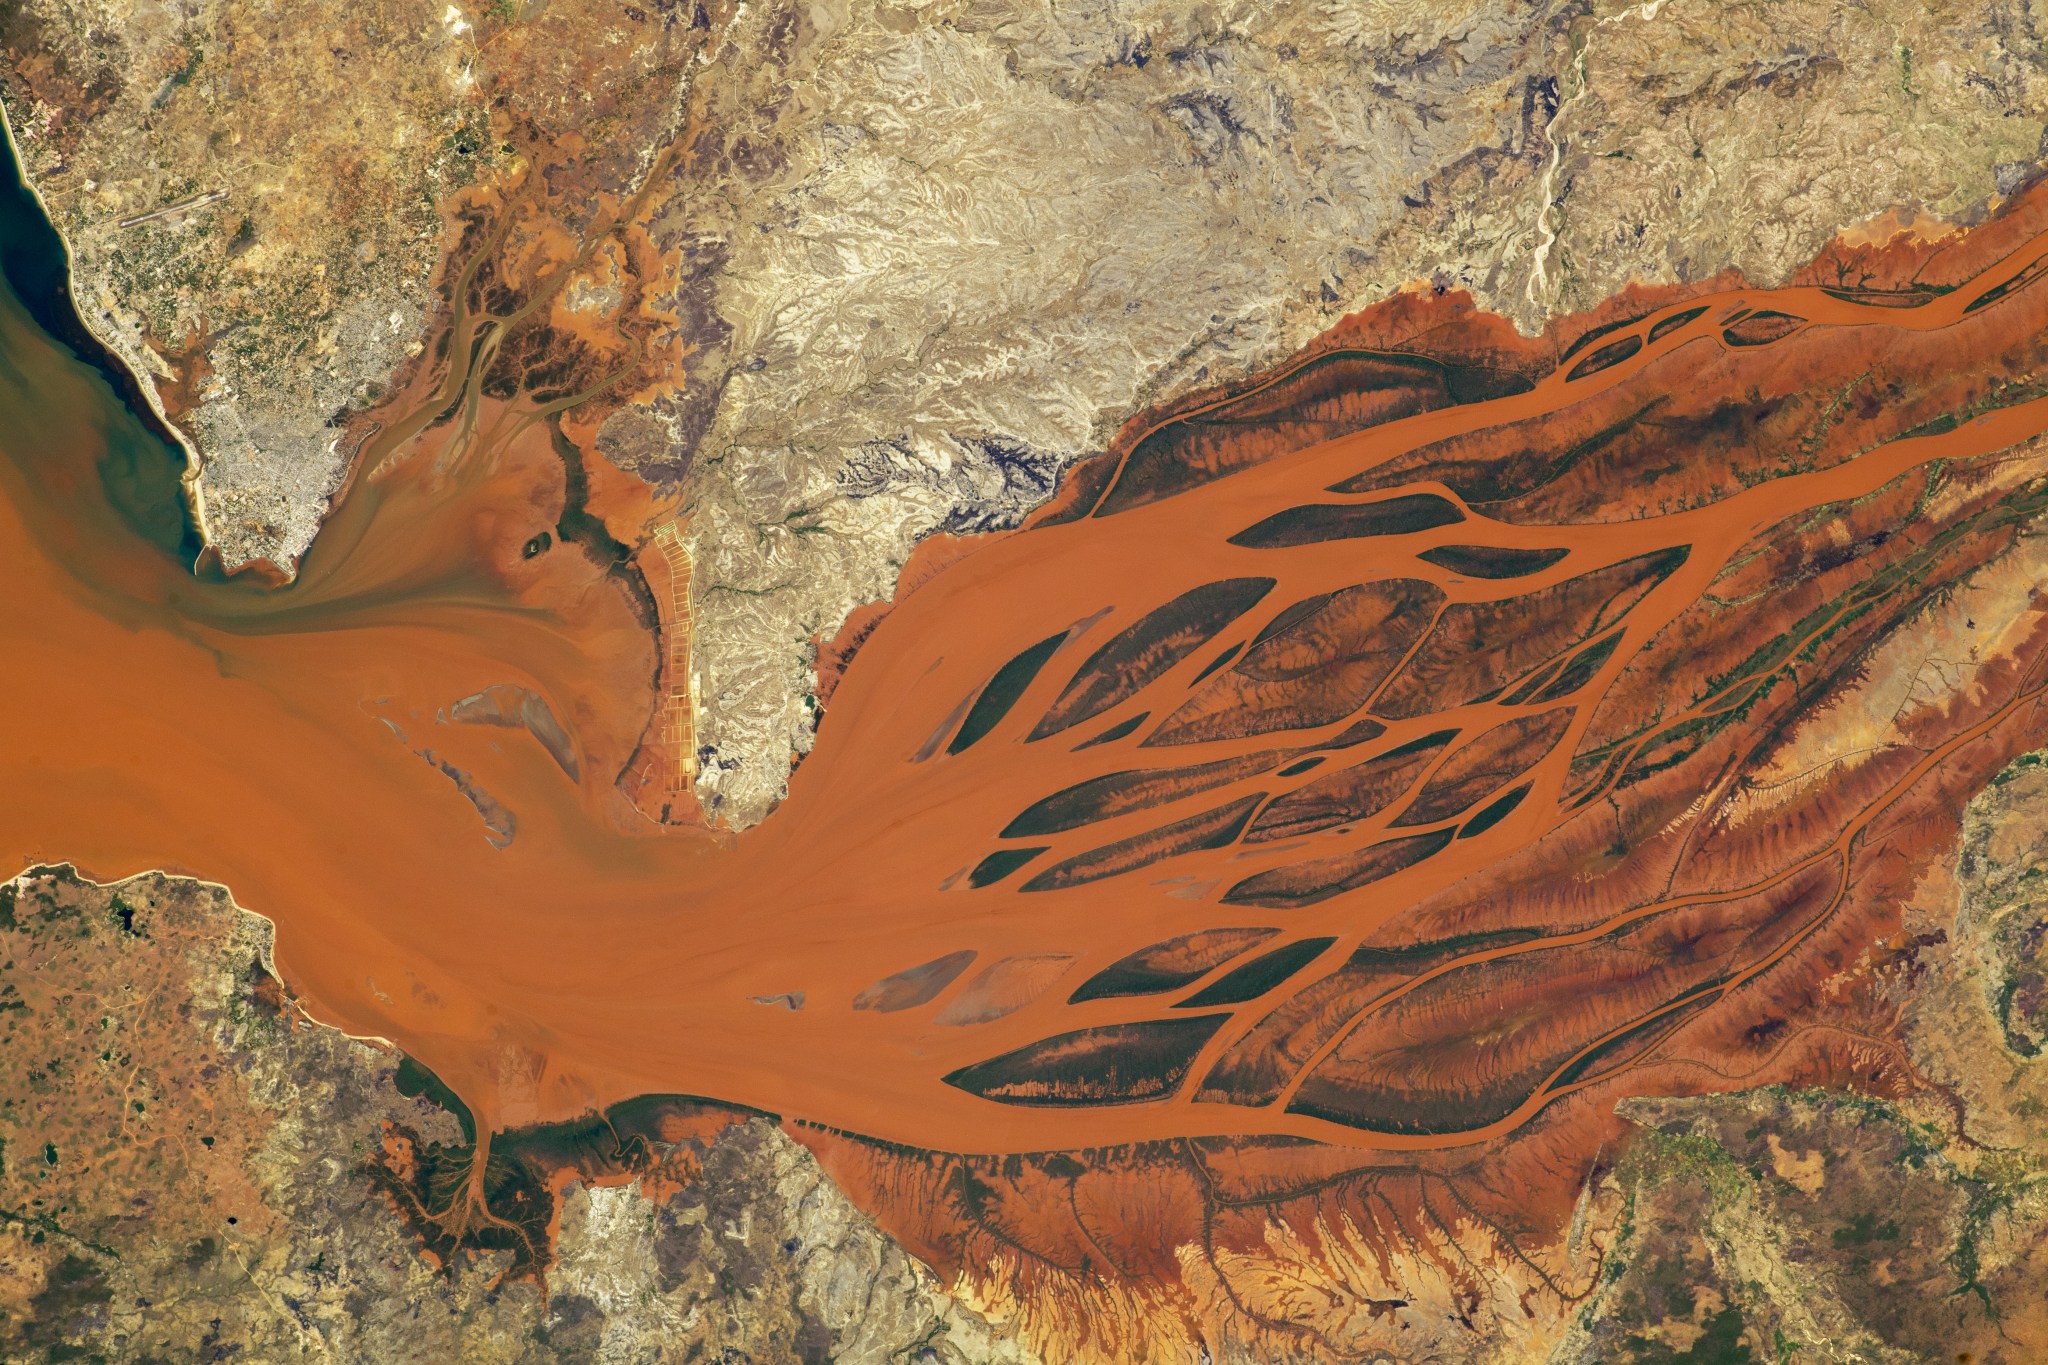 The waters of the Betsiboka River Delta, as seen from the International Space Station, are a vibrant orange. From left to right, the river branches off into many pathways, looking almost like the roots of a tree.